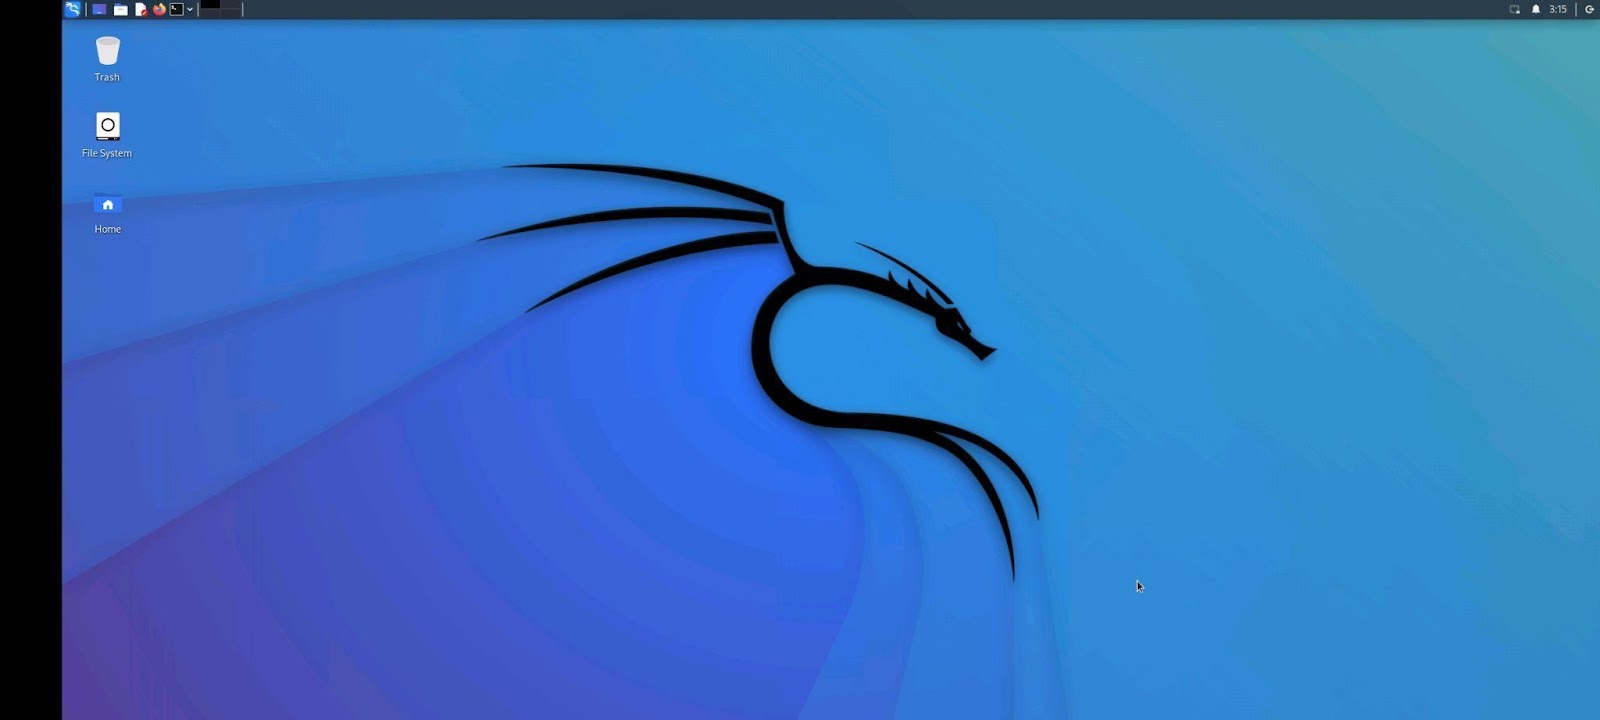 Kali Linux no Android